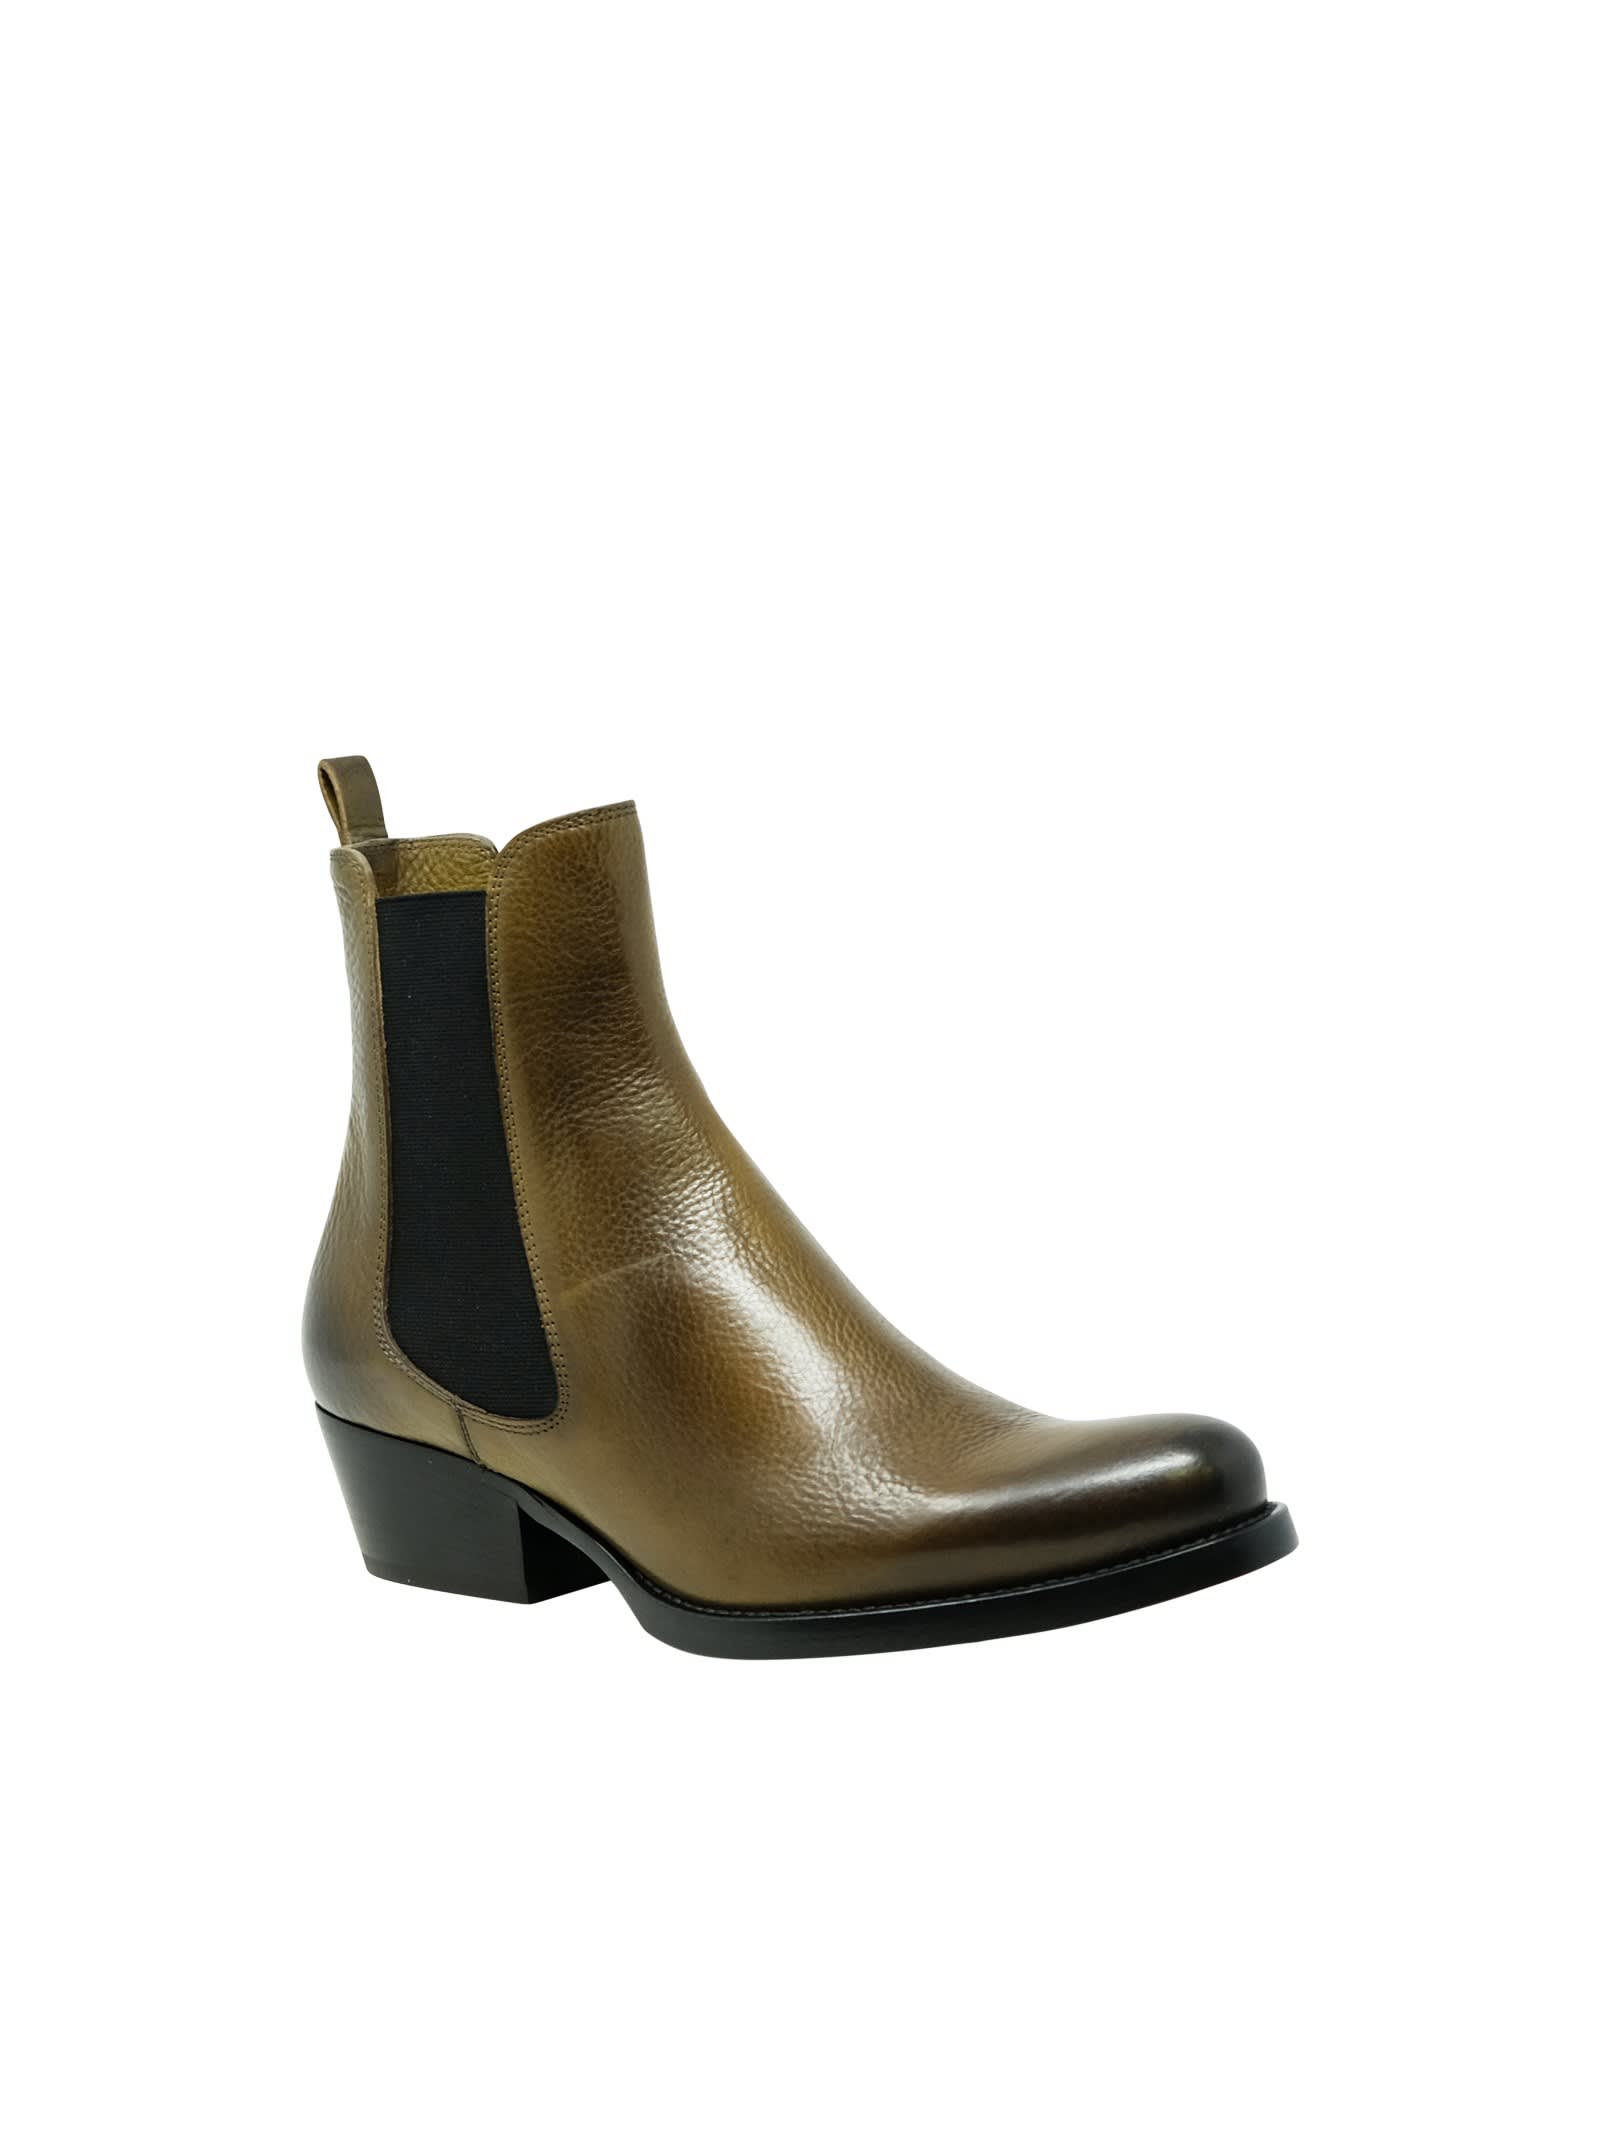 Shop Sartore Sr421001 Toscano Green Olive Leather Ankle Boots